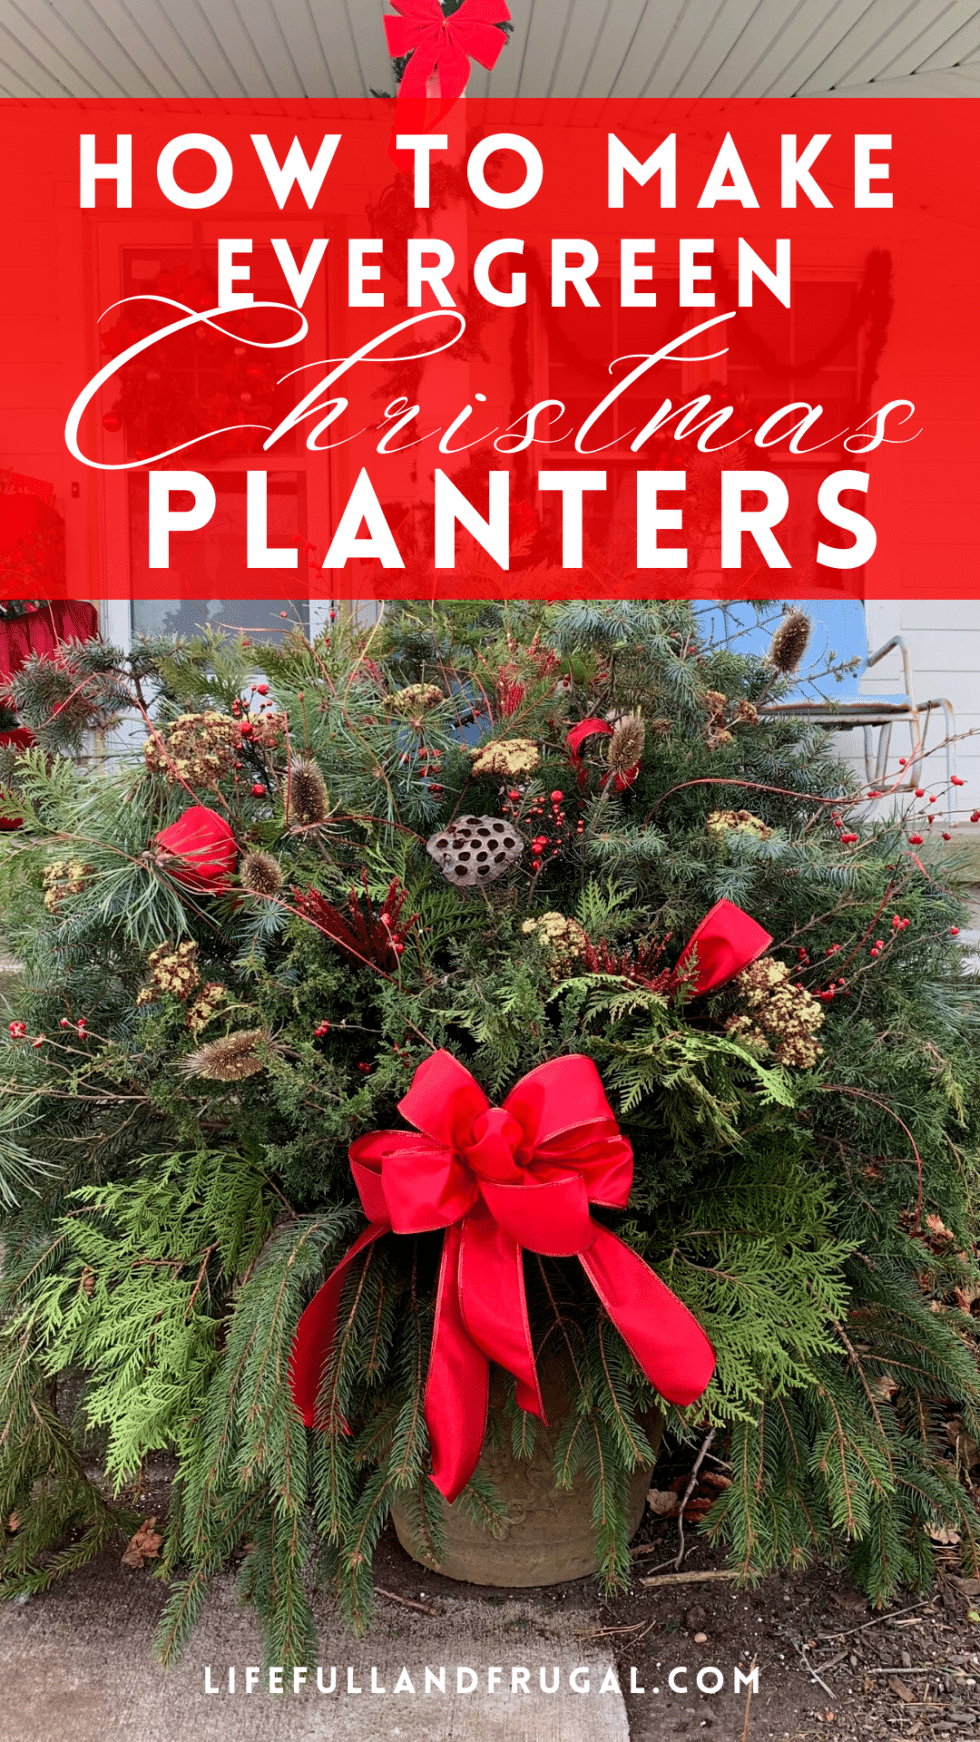 How to Make Evergreen Christmas Planters - Life Full and Frugal